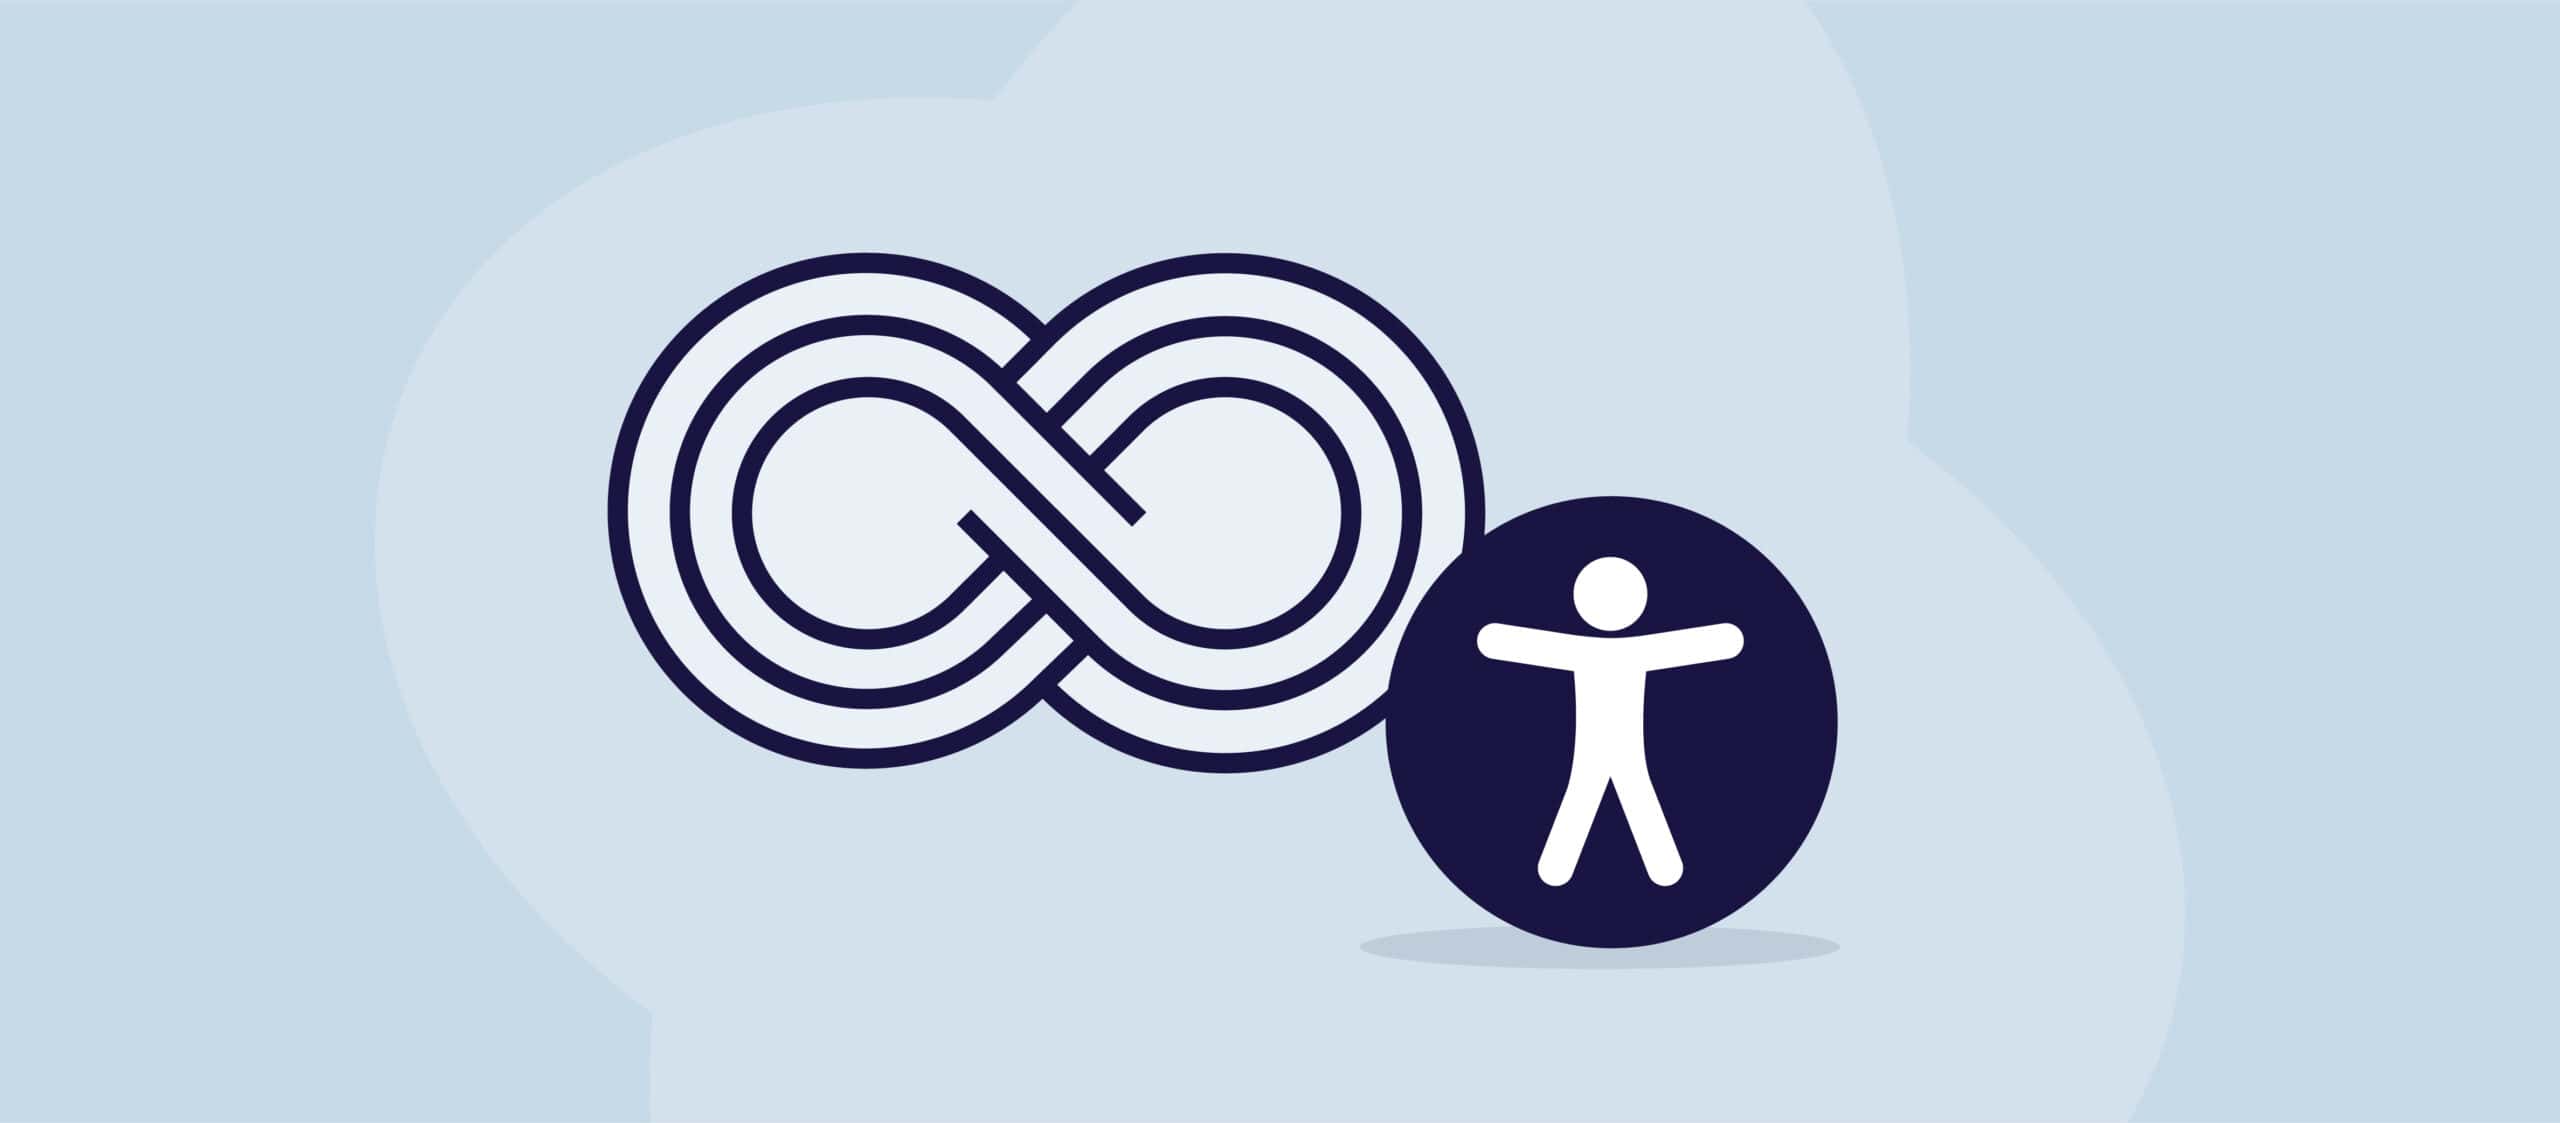 An illustration featuring the infinity symbol and the universal symbol for accessibility.